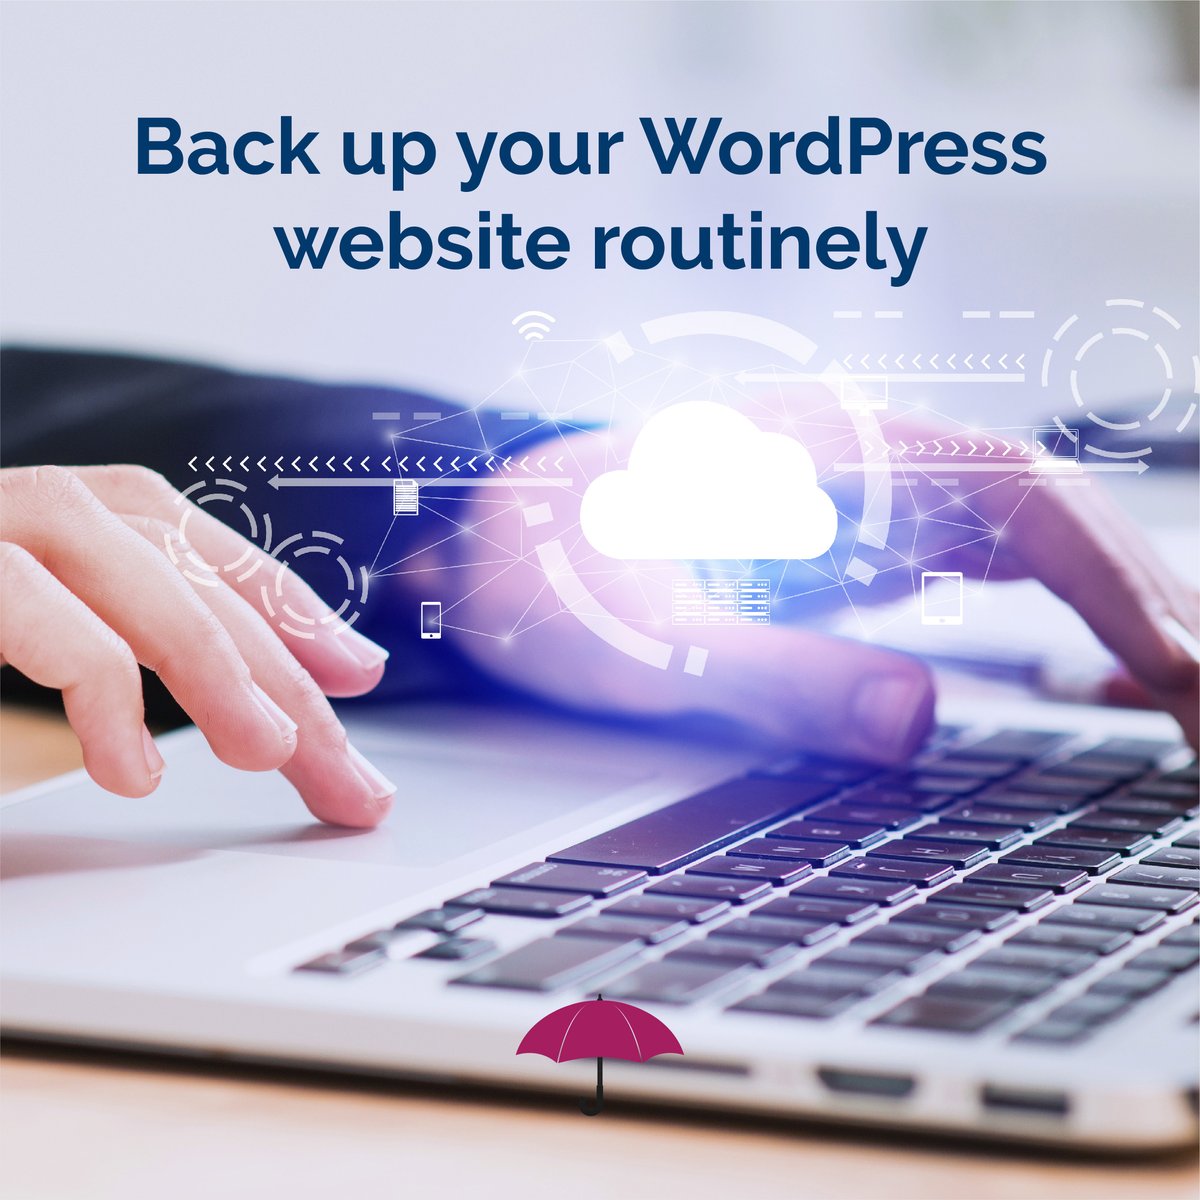 For security, it's important to back up your WordPress website routinely. Learn all the how-tos for backing up both your files and your data to keep your site secure. #RDD #RaneyDayDesign #WordPressWednesday

raneydaydesign.com/website-securi…